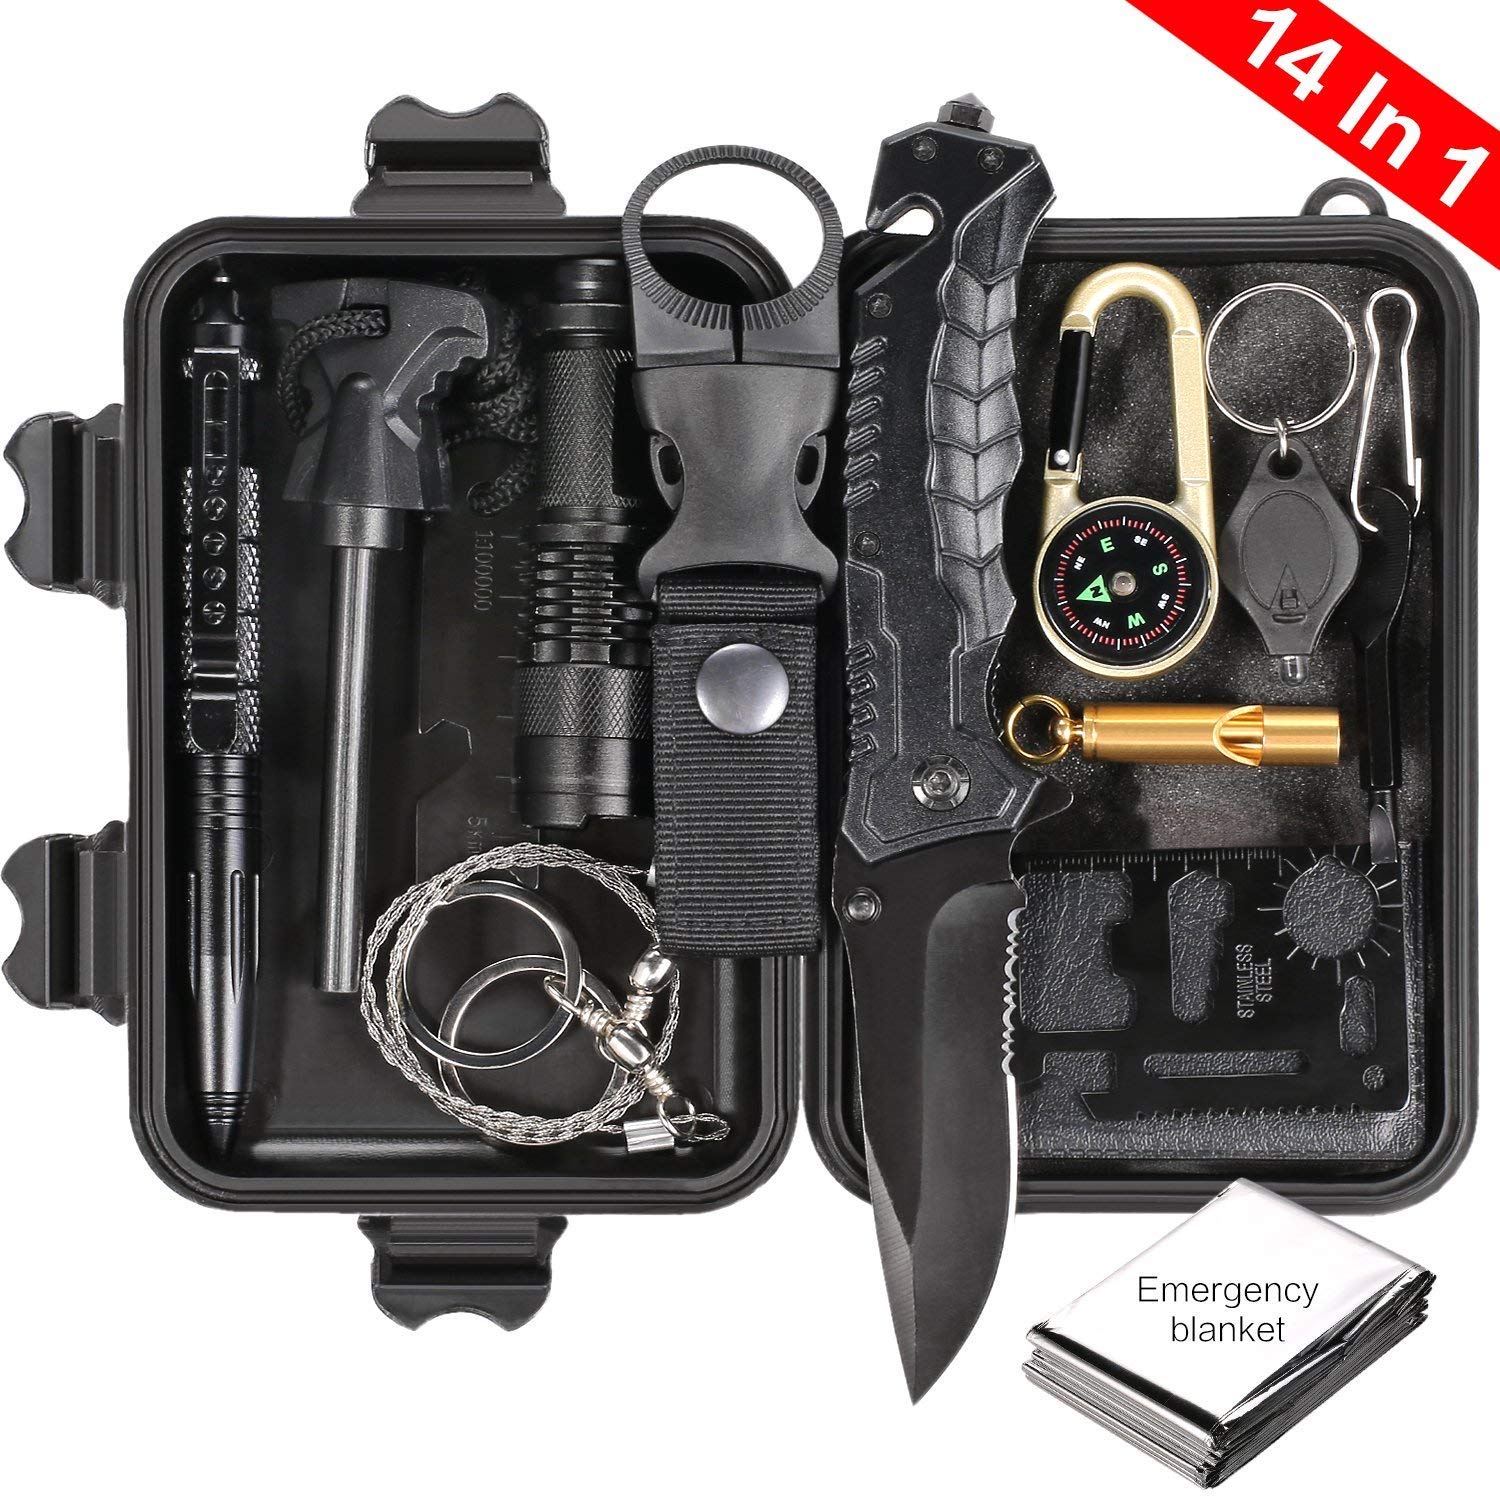 Review of Puhibuox Survival Gear Kit, EDC Outdoor Emergency Tactical Survival Tool for Cars, Camping, Hiking, Hunting, Adventure Accessories